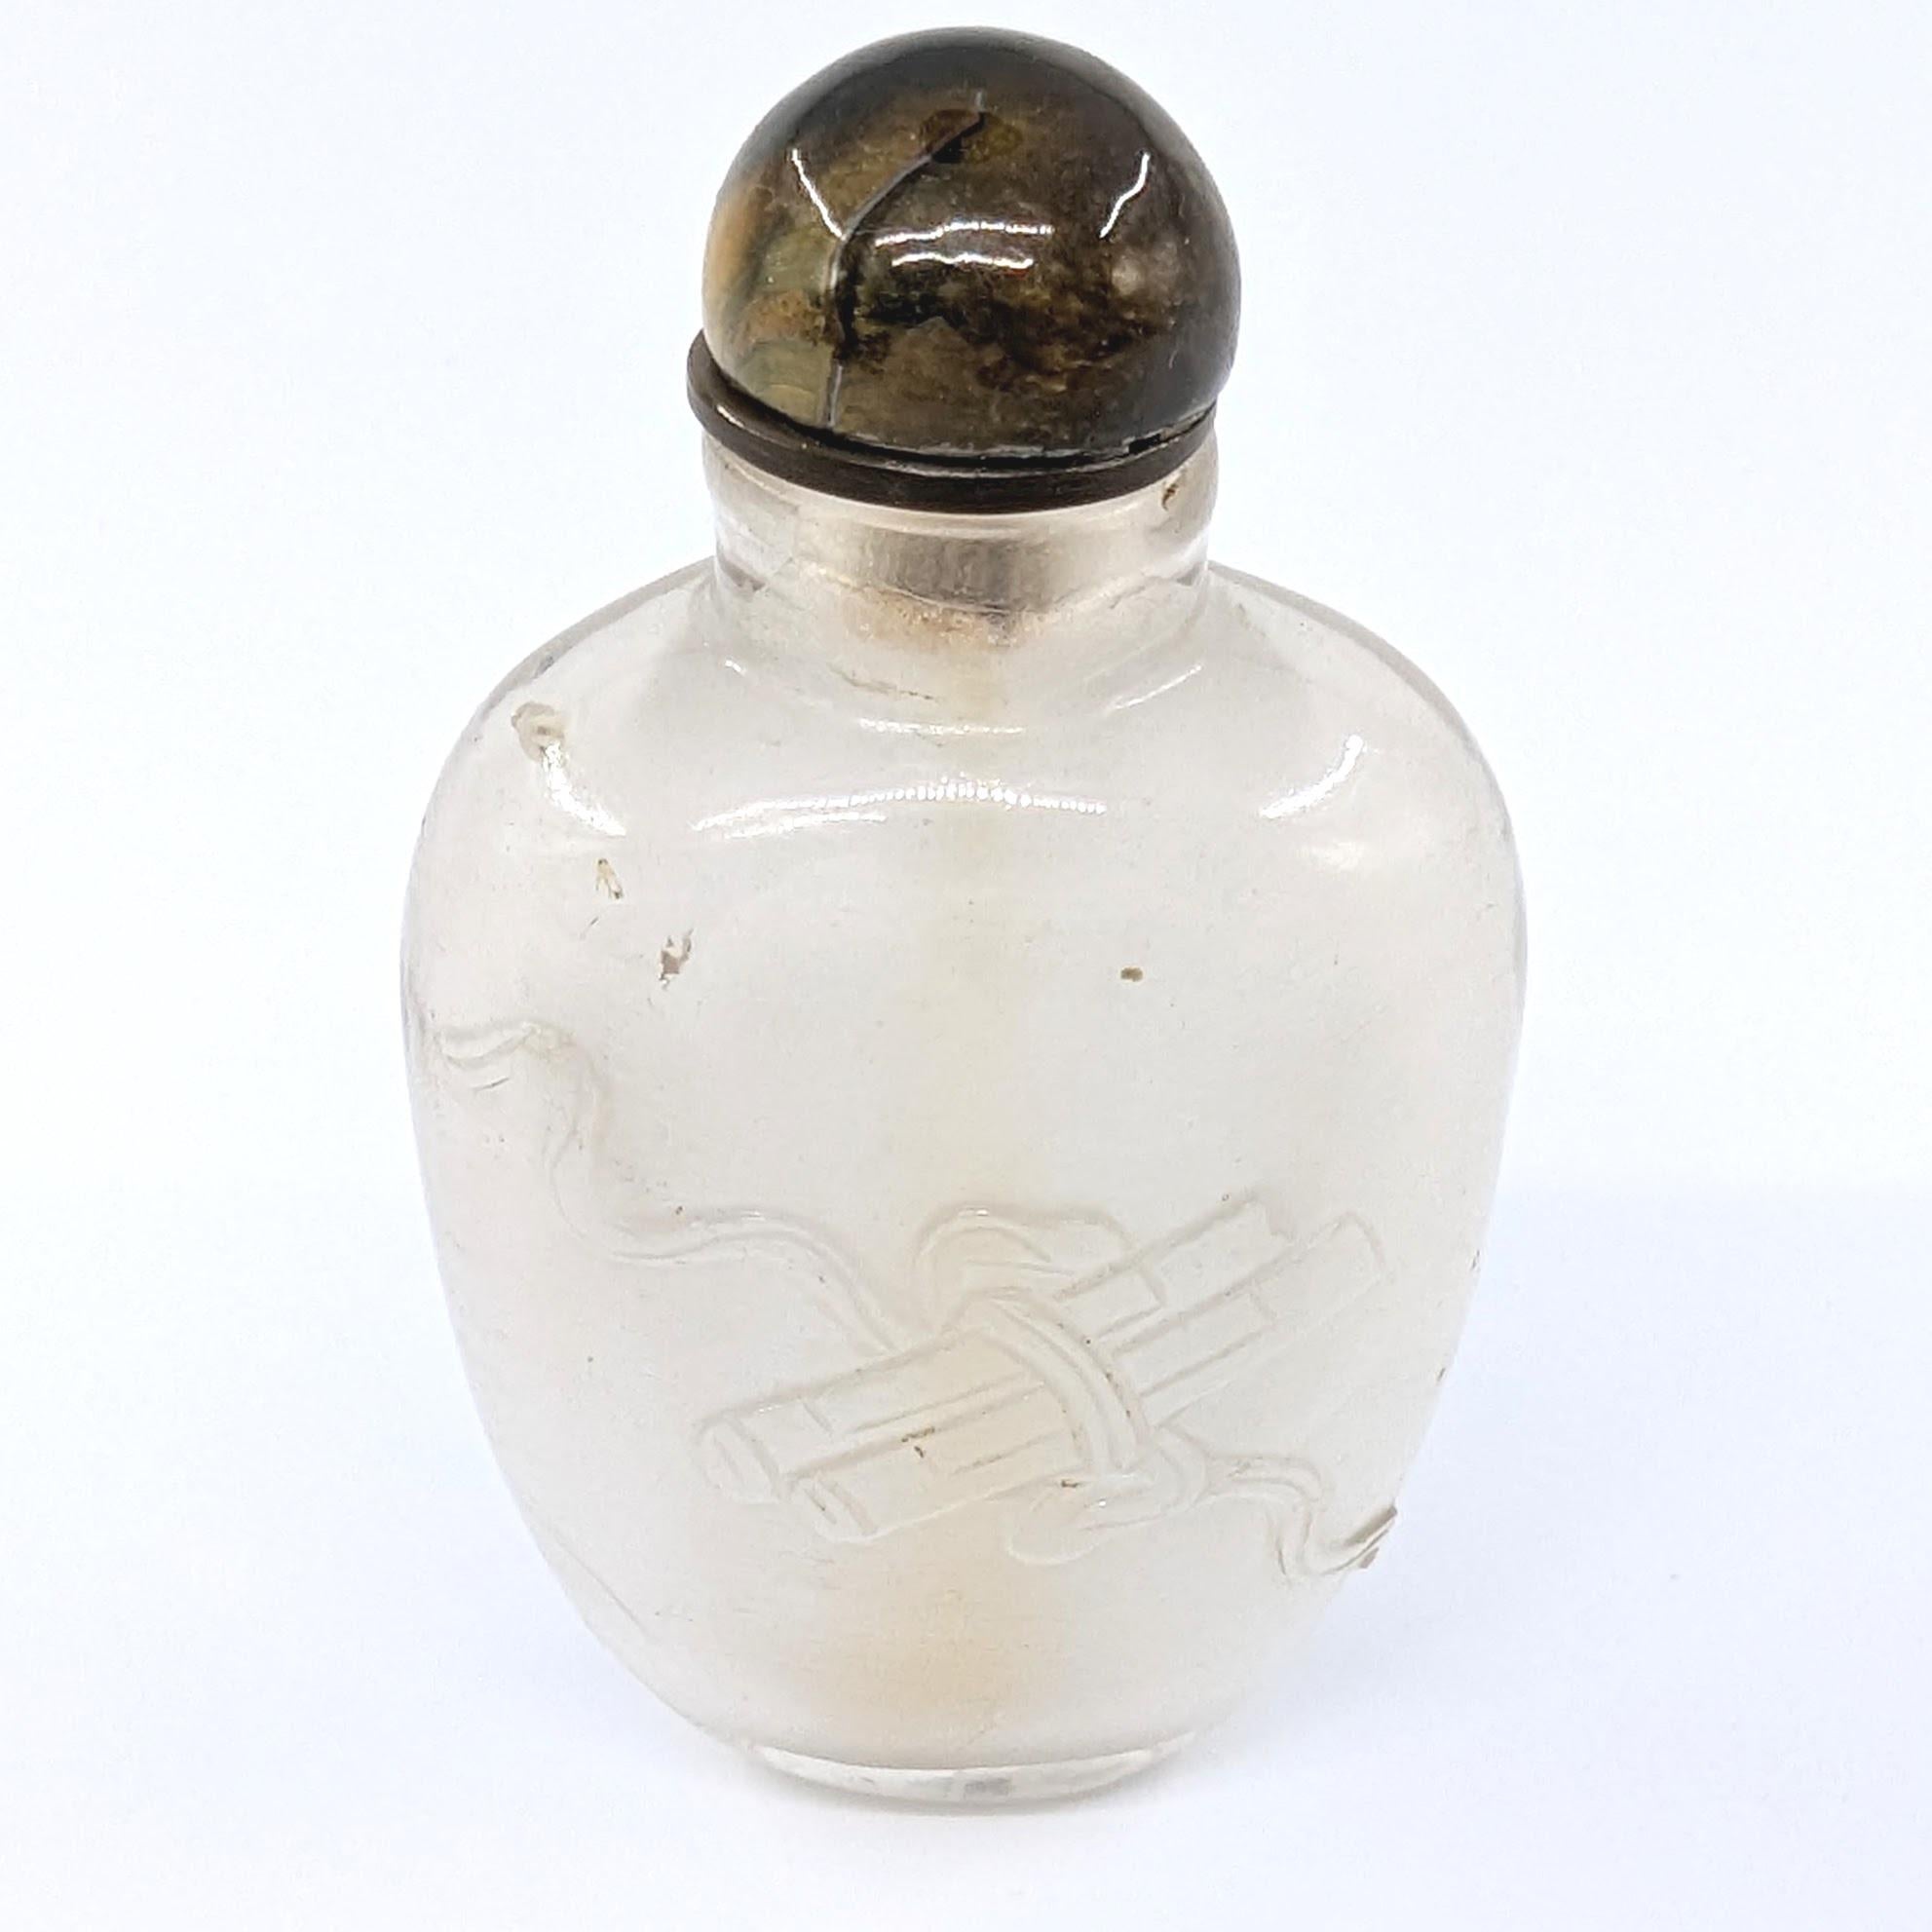 Antique Chinese rock crystal snuff bottle, finely carved in low relief with a lotus scene to one side and a scroll in flowing ribbons to the other, with tiger's eye stopper and bone spoon 

19c Qing Dynasty